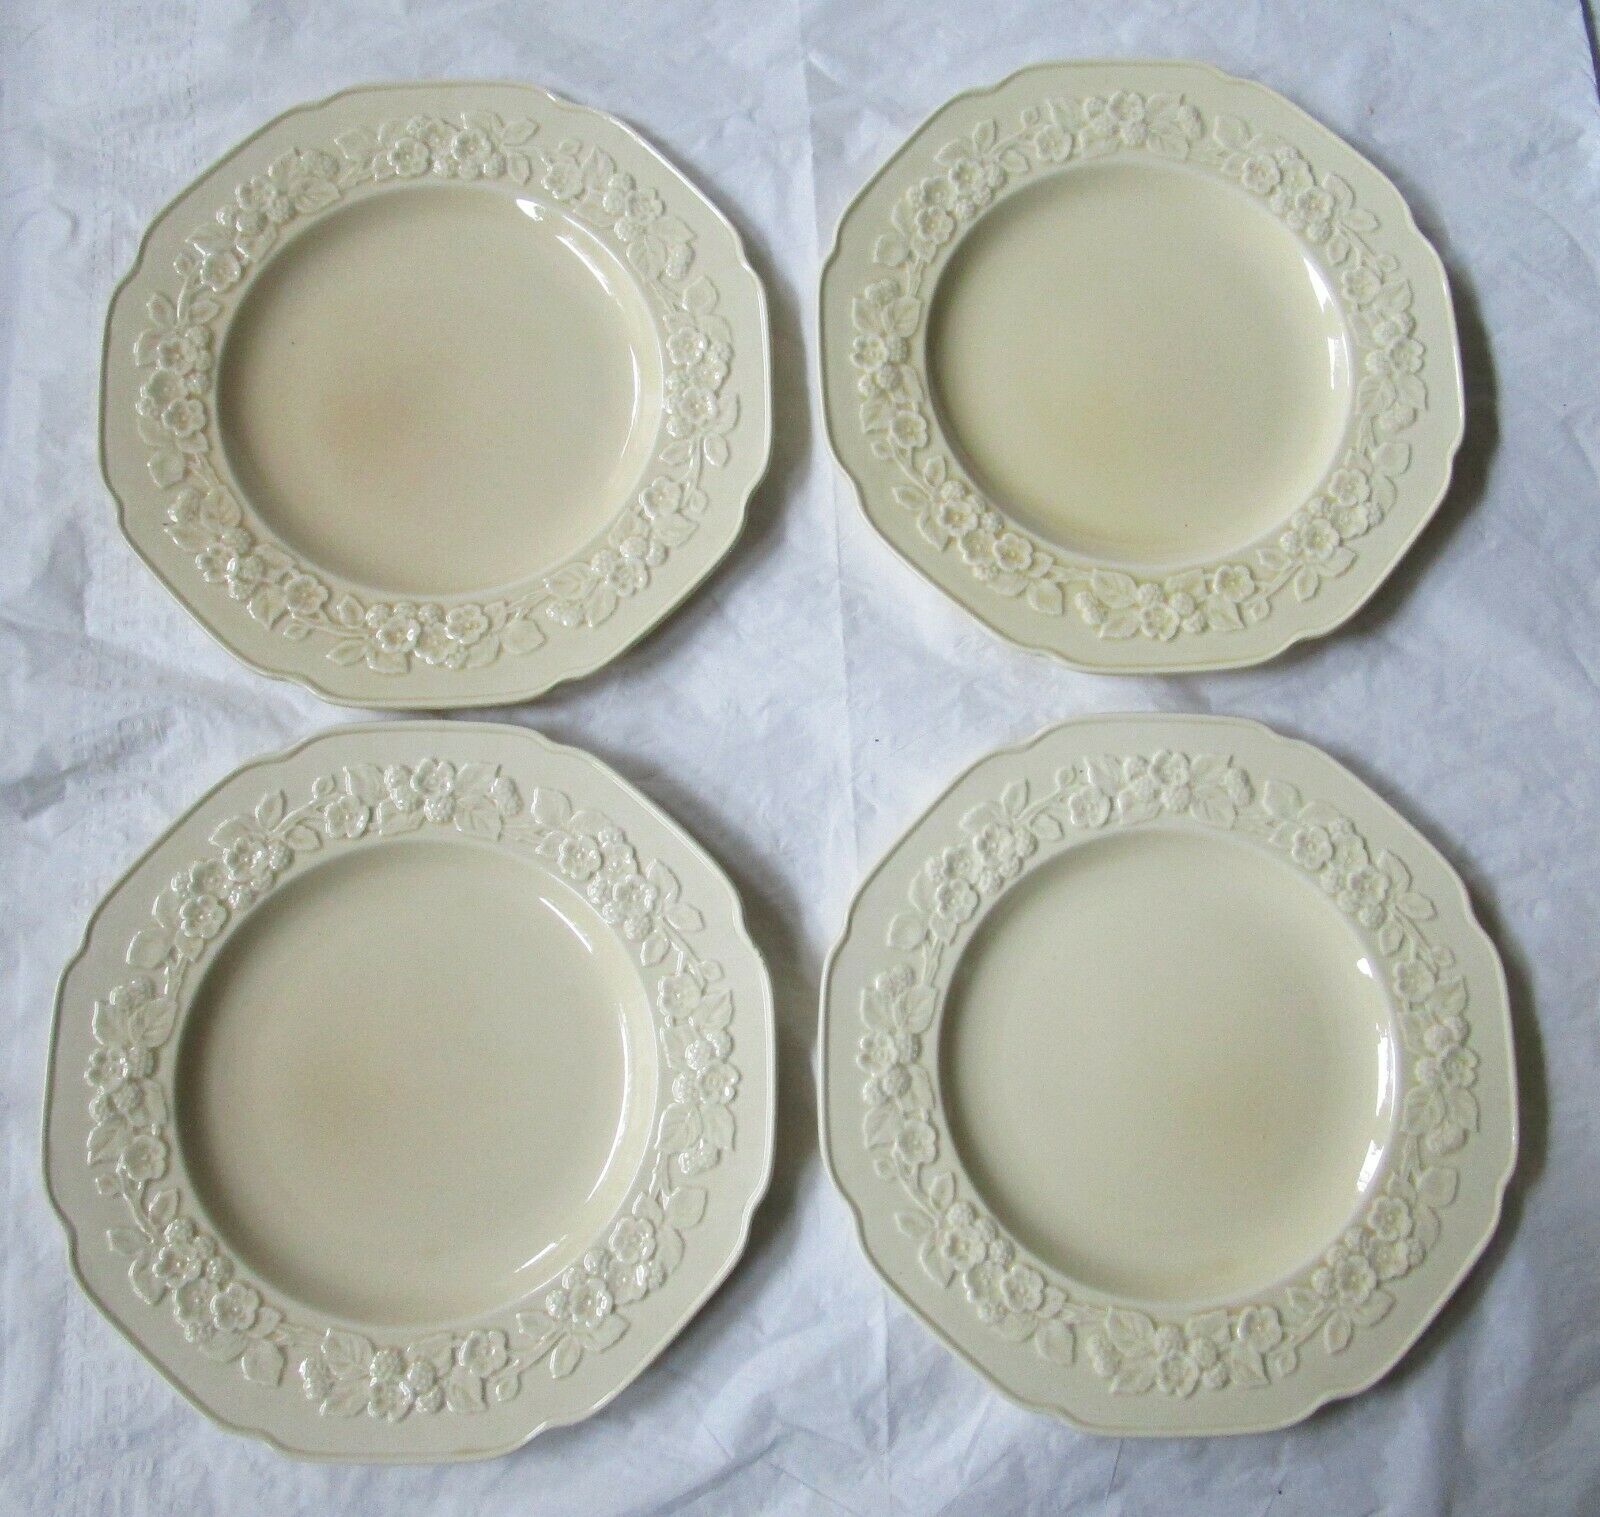 Set Of 4 Crown Ducal Gainsborough 10.5" Dinner Plates, Off-white (c. 1930s)